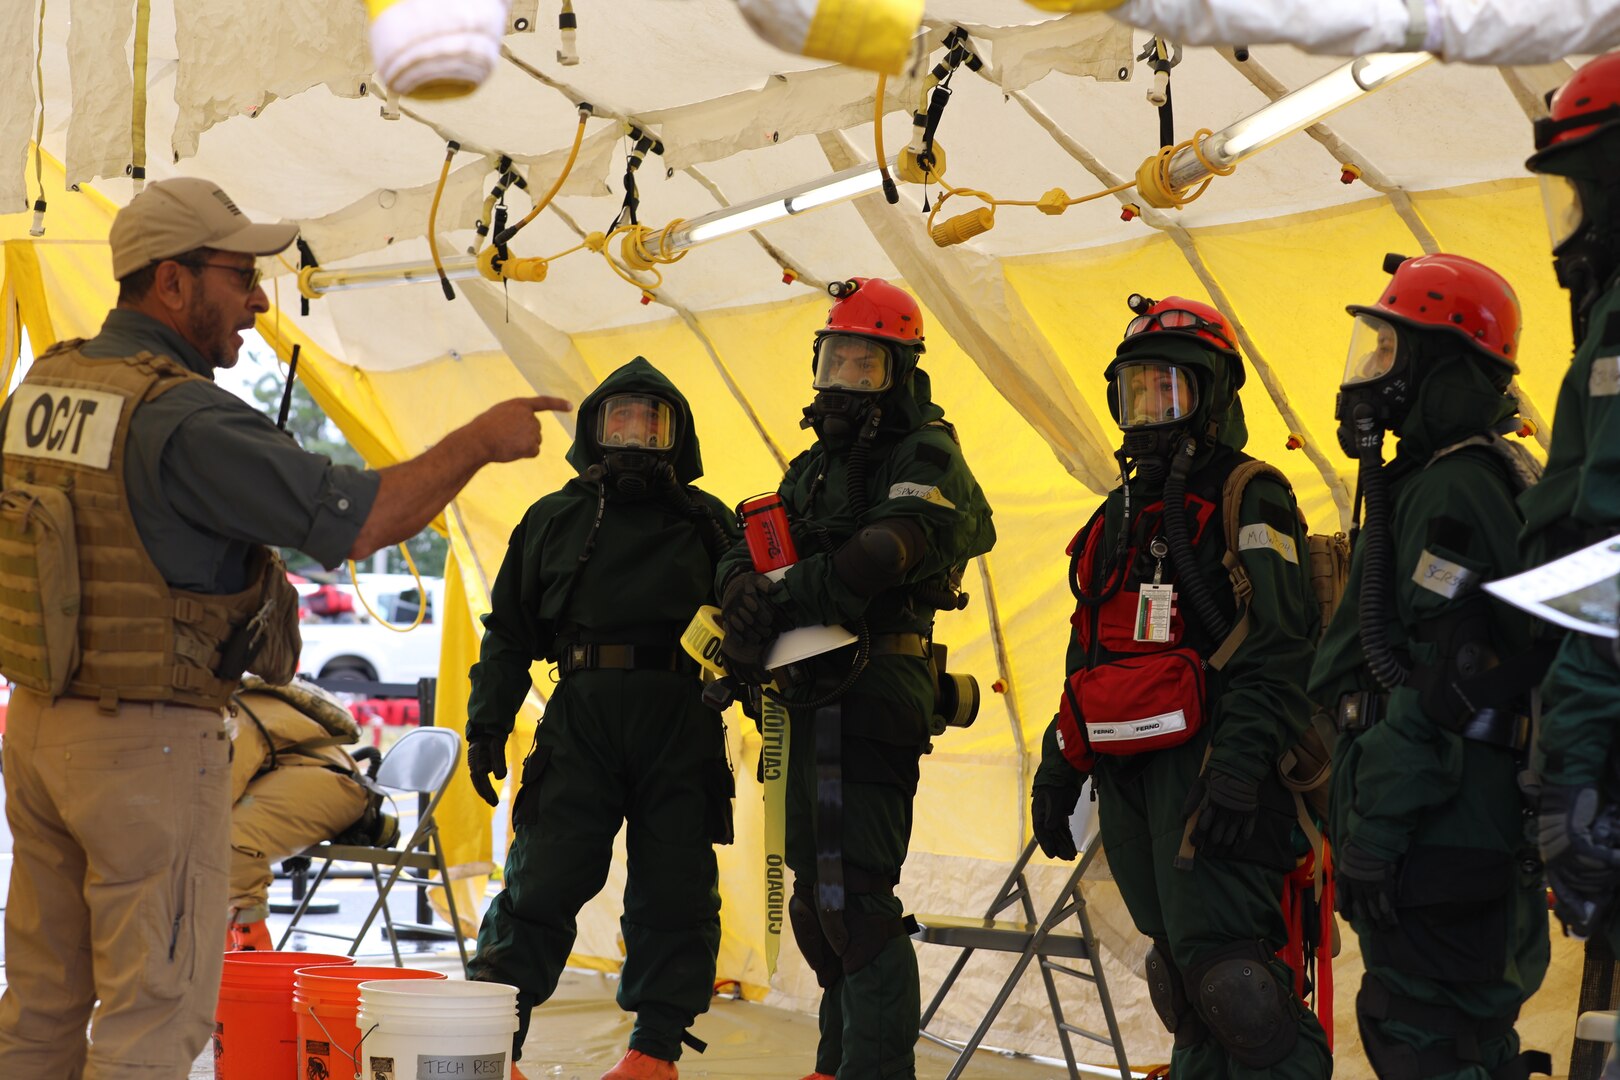 A search and extraction team conducts a debriefing with an instructor following their casualty search. Approximately 180 Soldiers and Airmen from Maine, Rhode Island, and New Hampshire came together at Joint Base Cap Cod, Massachusetts, Aug. 12-18, 2023, for an external evaluation of the New England CERFP, a regional National Guard response team that assists first responders during large-scale emergencies.